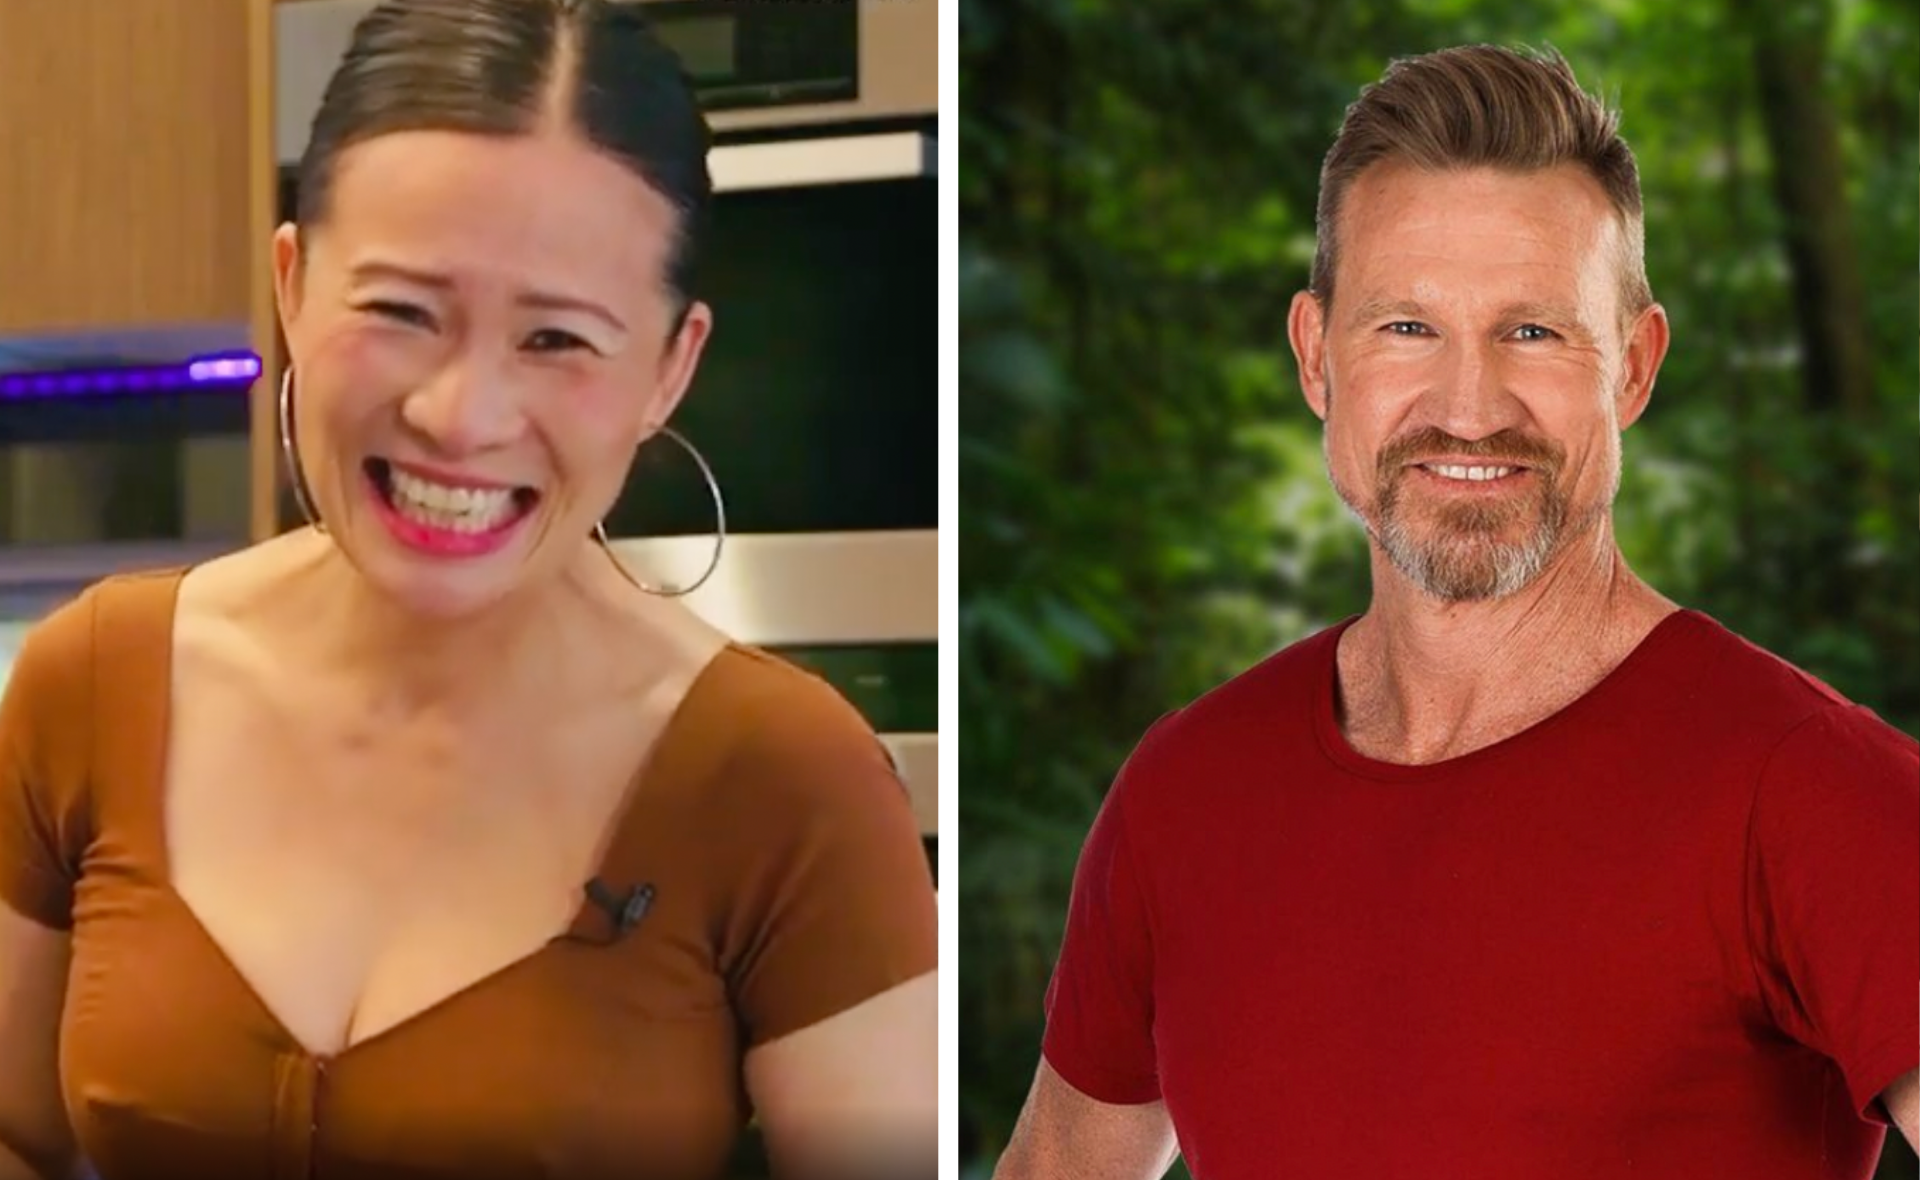 Welcome to the jungle! Meet the contestants for I’m A Celebrity… Get Me Out Of Here Australia 2022